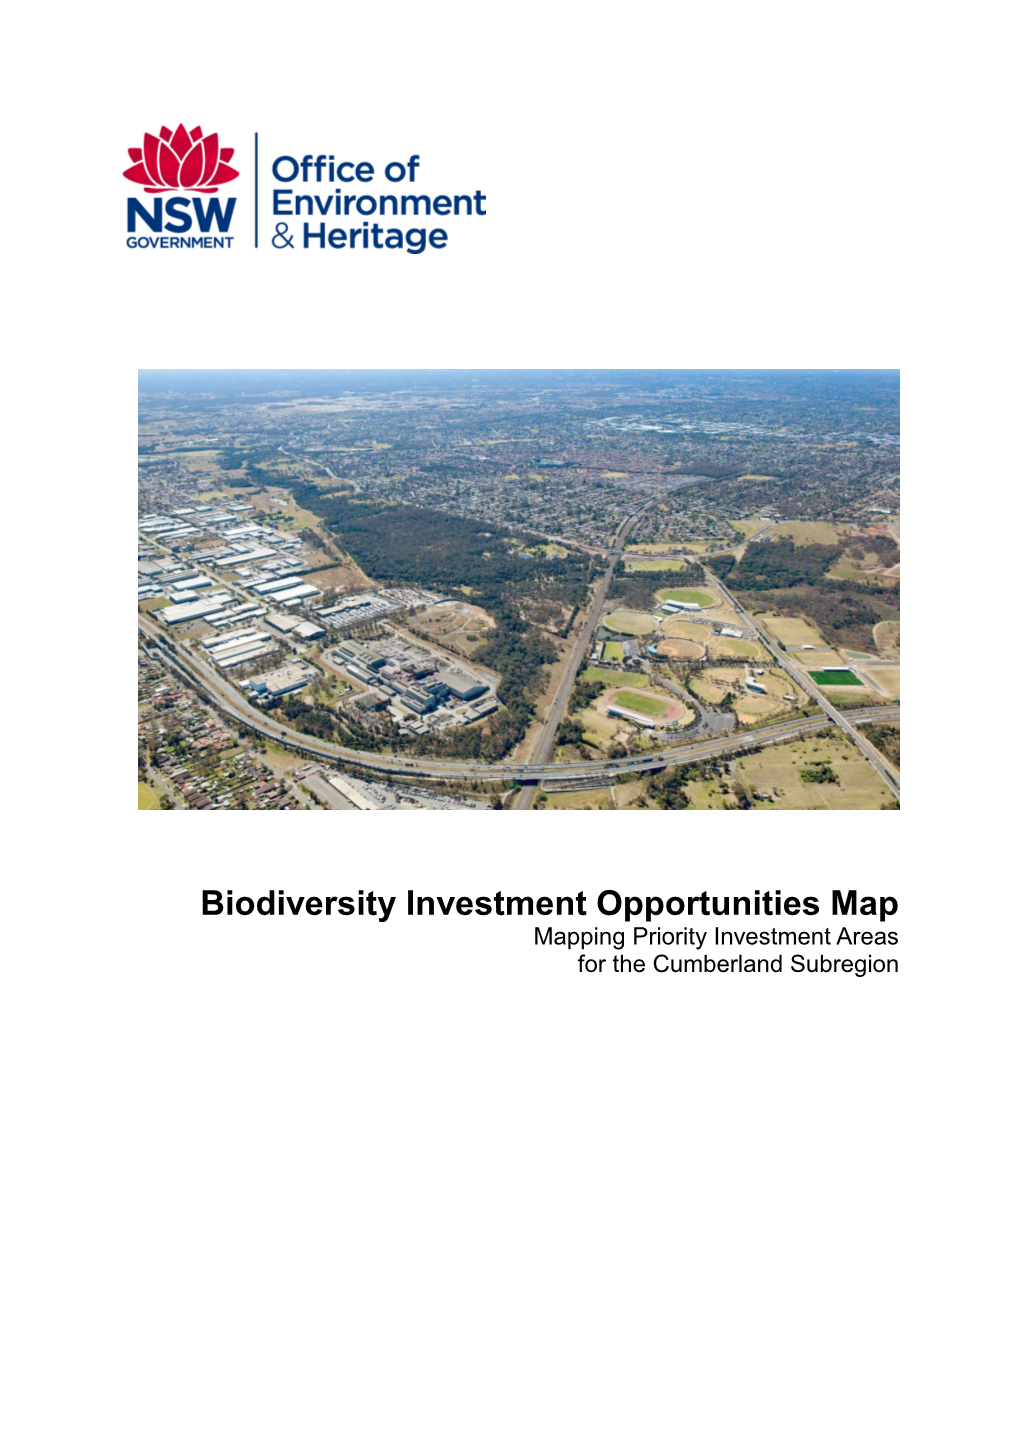 Biodiversity Investment Opportunities Map Mapping Priority Investment Areas for the Cumberland Subregion